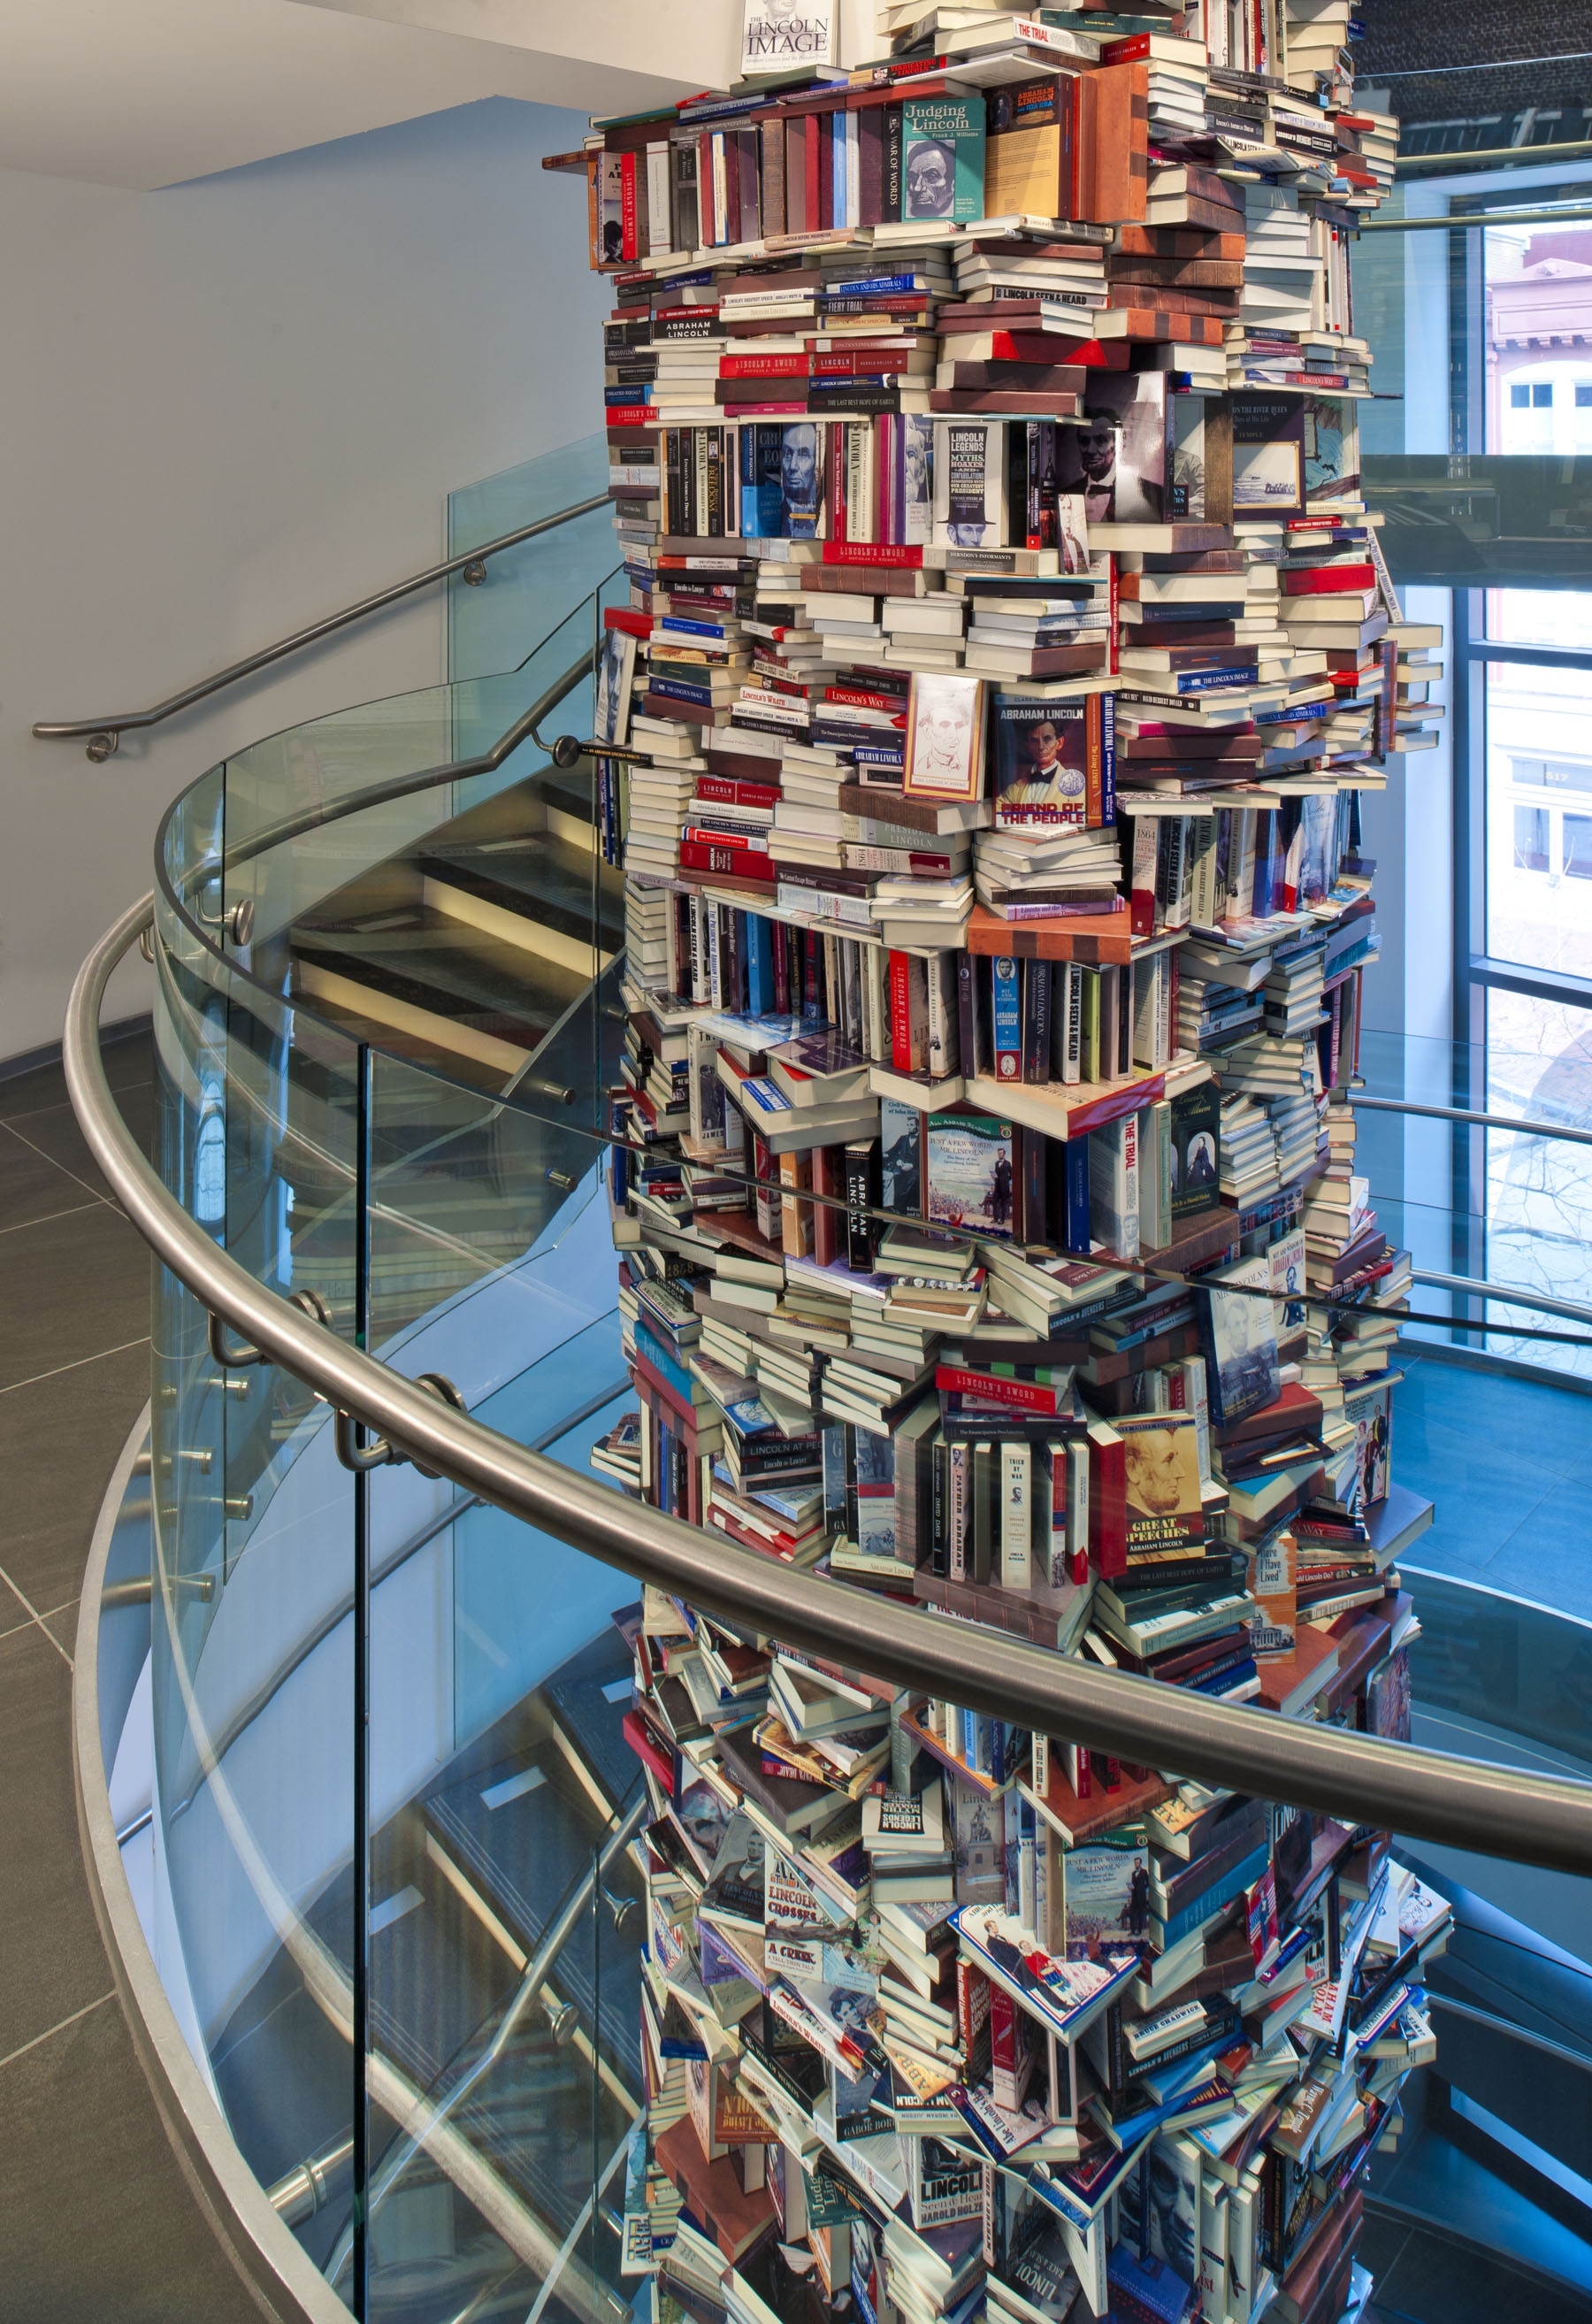 Replicas of books are stacked two stories high.